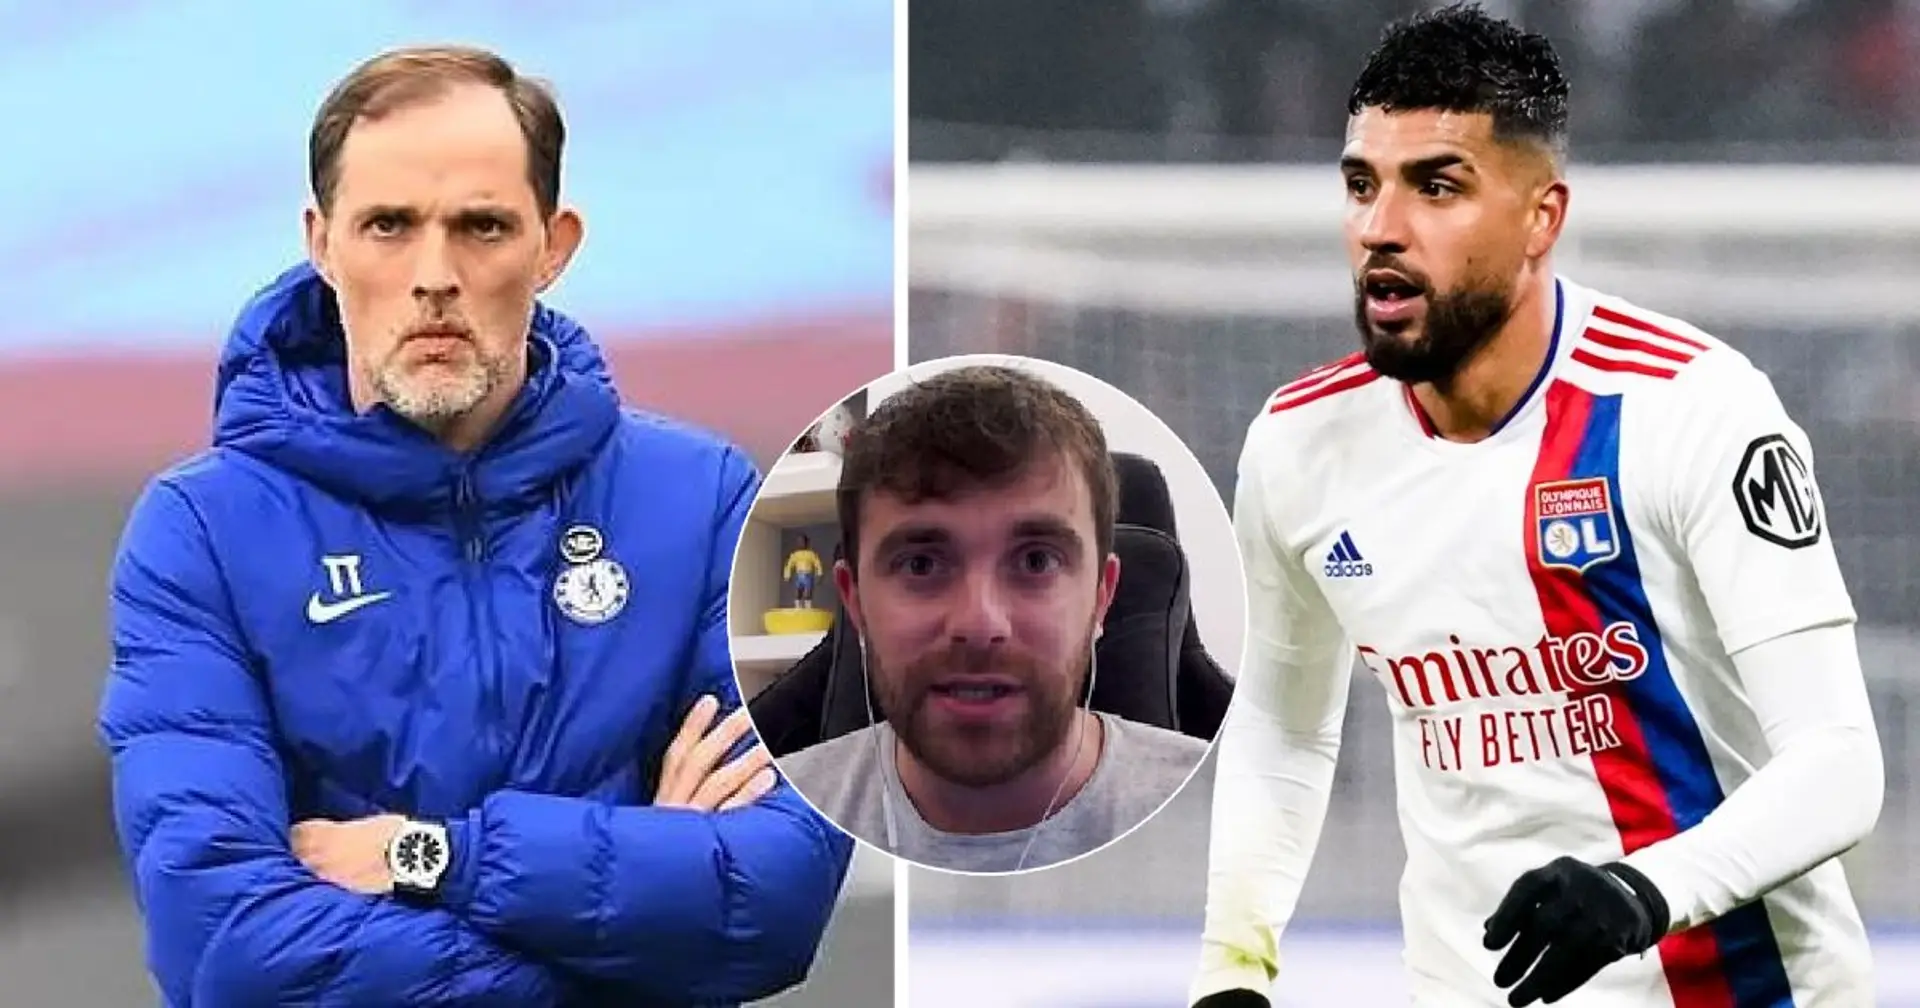 Lyon turn down third Chelsea approach for Emerson, Tuchel wants him but deal is 'difficult': Romano